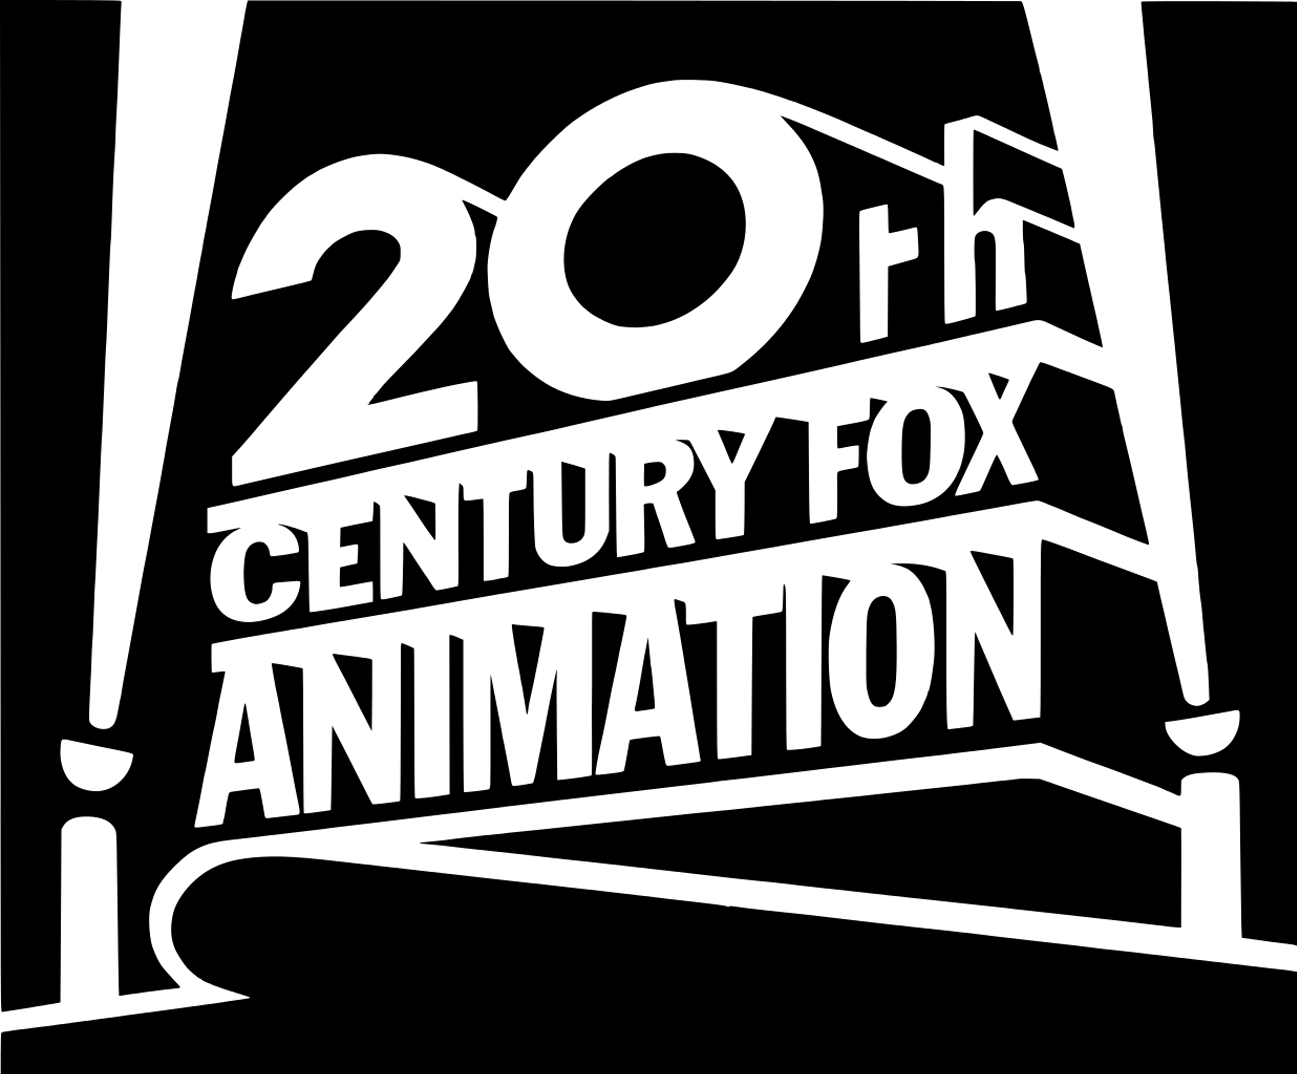 20th Logo - Meaning 20th Century Fox logo and symbol | history and evolution